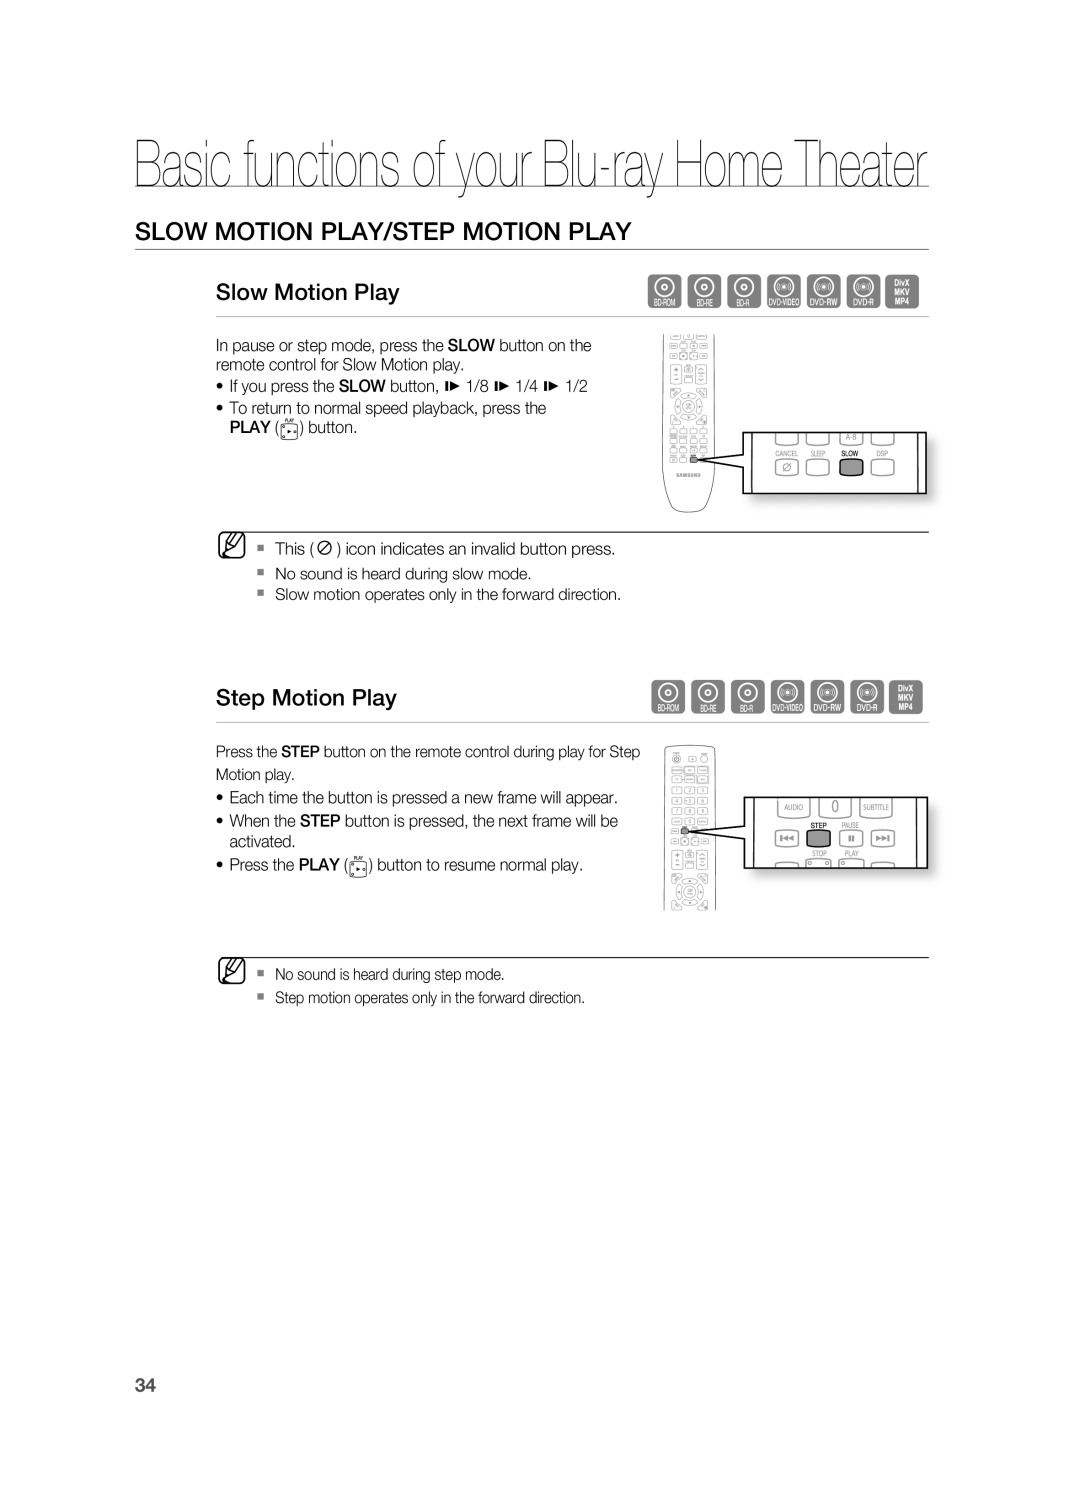 Samsung HT-BD8200 user manual Slow Motion Play/Step Motion Play, Basic functions of your Blu-rayHome Theater, hgfZCV 